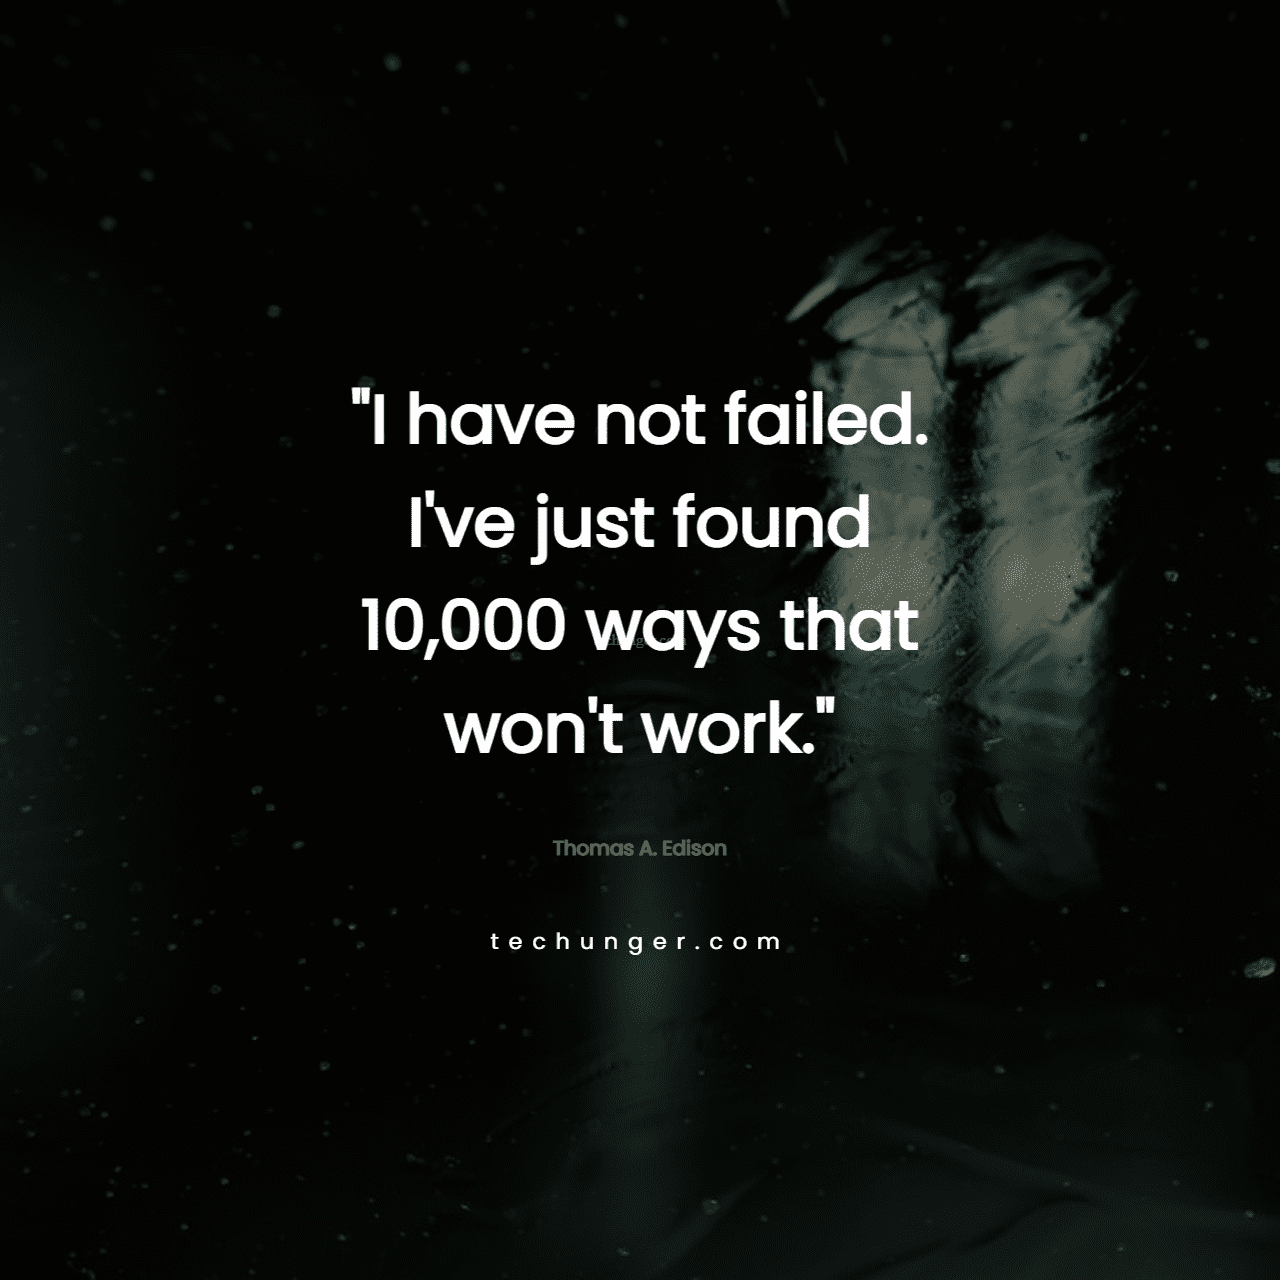 motivational,inspirational,quotes,
  I have not failed. I've just found 10,000 ways that won't work. 
  Thomas A. Edison
